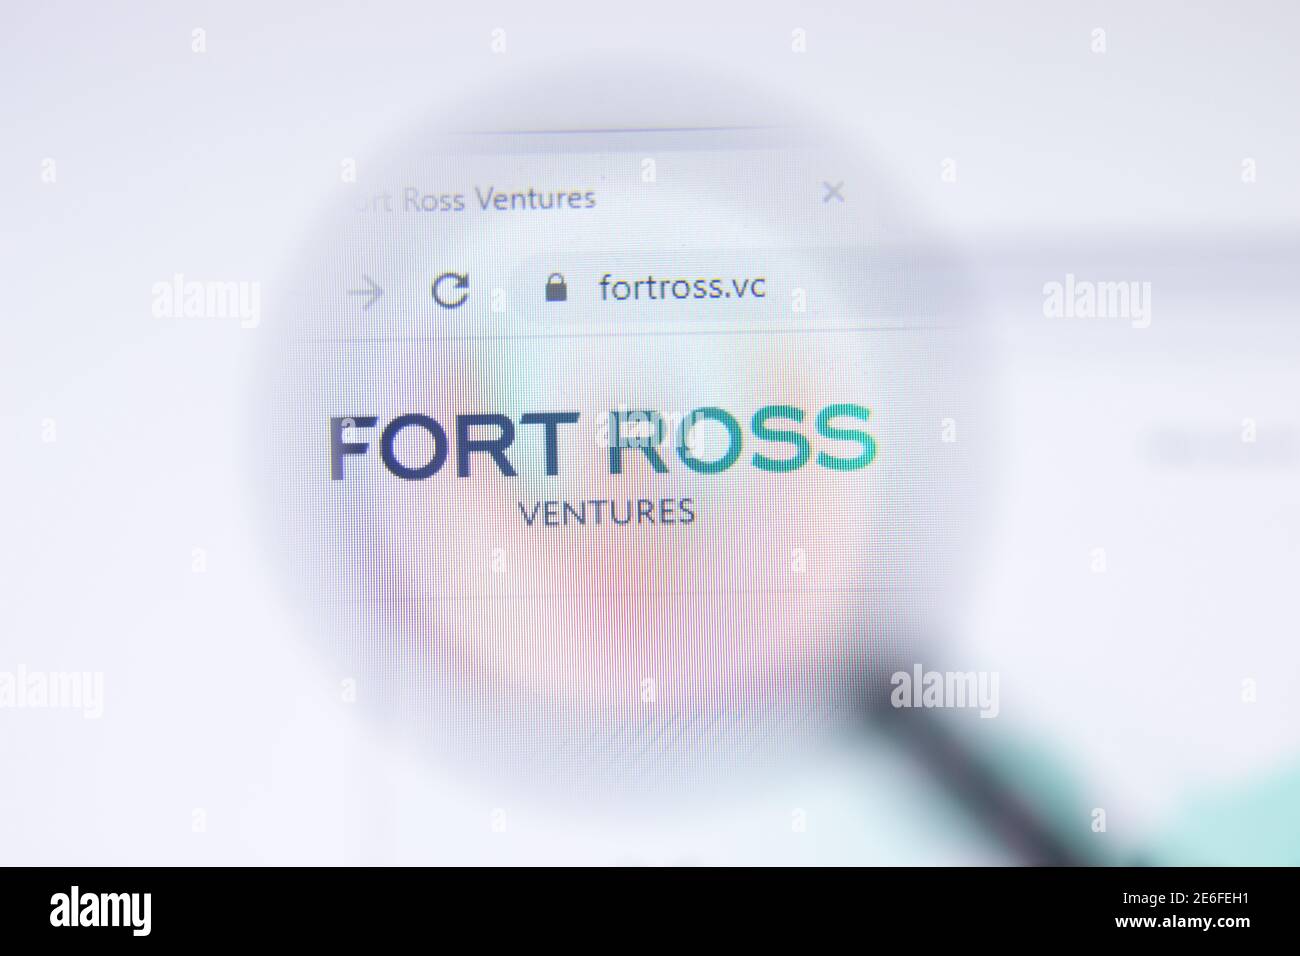 Saint Petersburg, Russia - 28 January 2021: Fort Ross Ventures website page with logo close-up, Illustrative Editorial Stock Photo